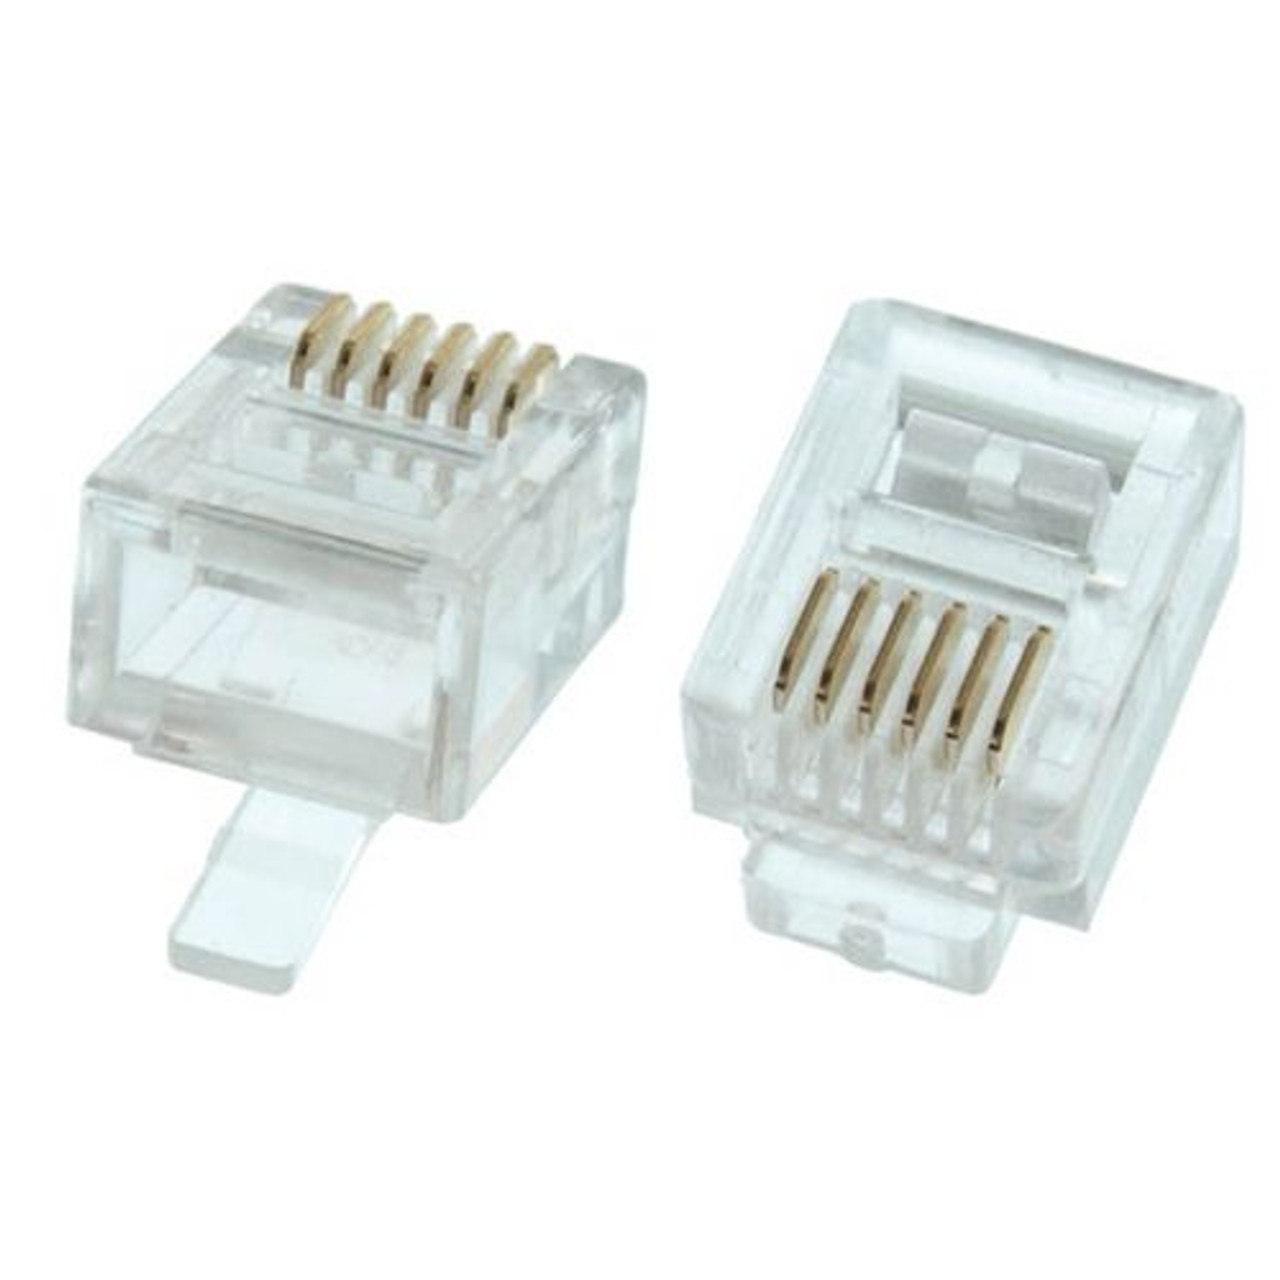 Steren 300-066 RJ12 Plug Connector 10 Pack  Modular Stranded 6P6C Telephone Connector Gold Conductor Audio Data Signal Snap-In Telephone with Gold Contacts, Part # 300066